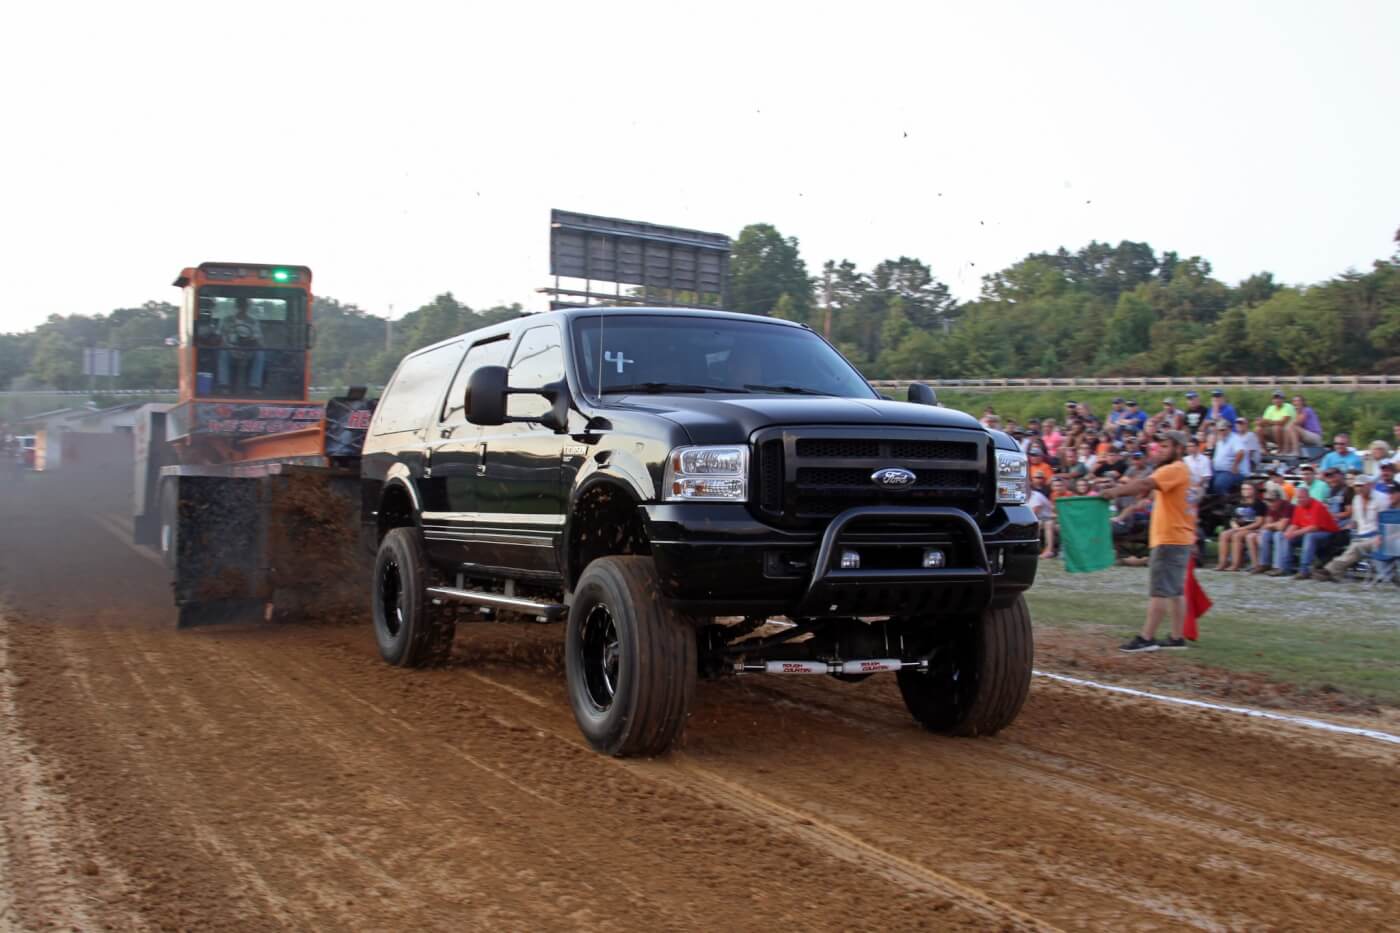 Bobby Stanley finished third in the Work Stock class with his lifted 2005 Ford Excursion.